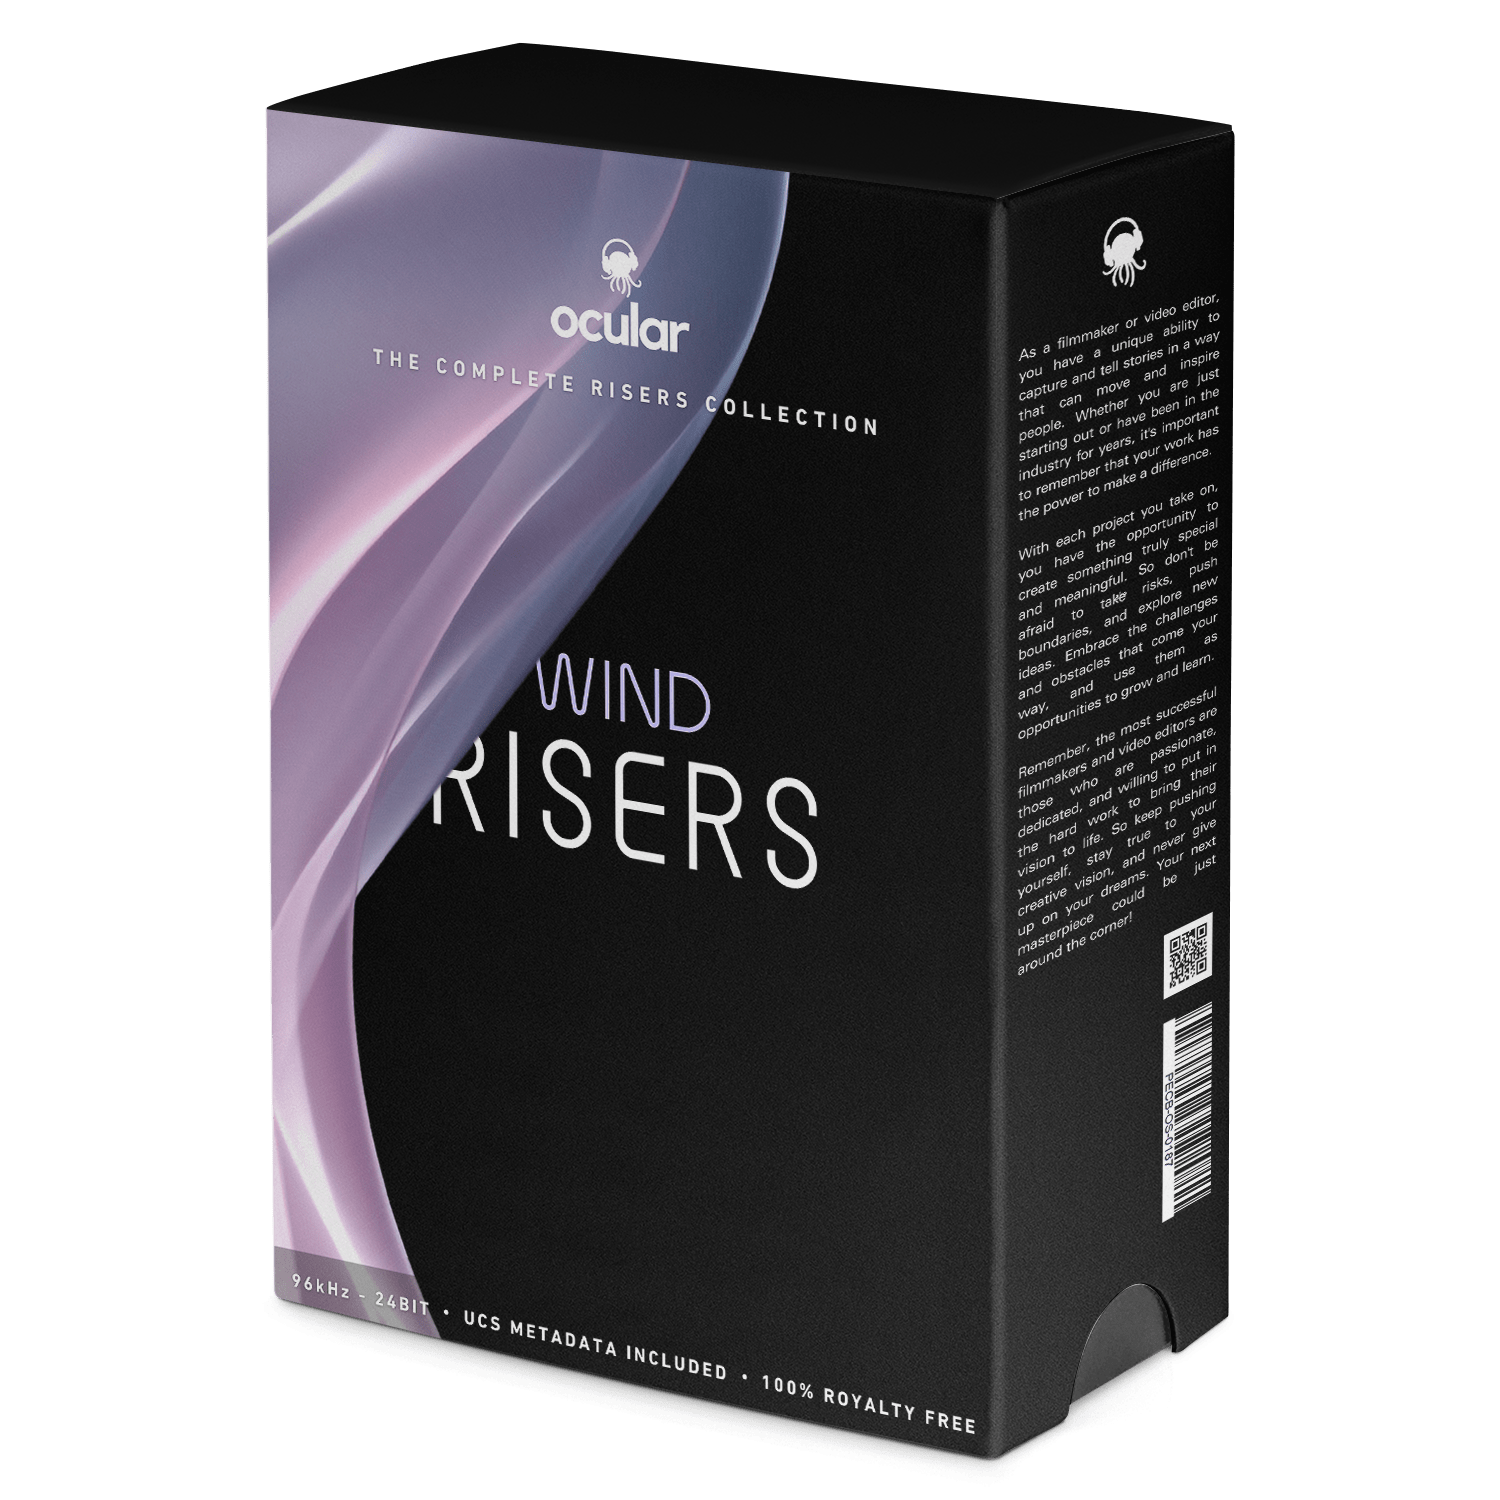 Wind Risers Sound FX for video editing.